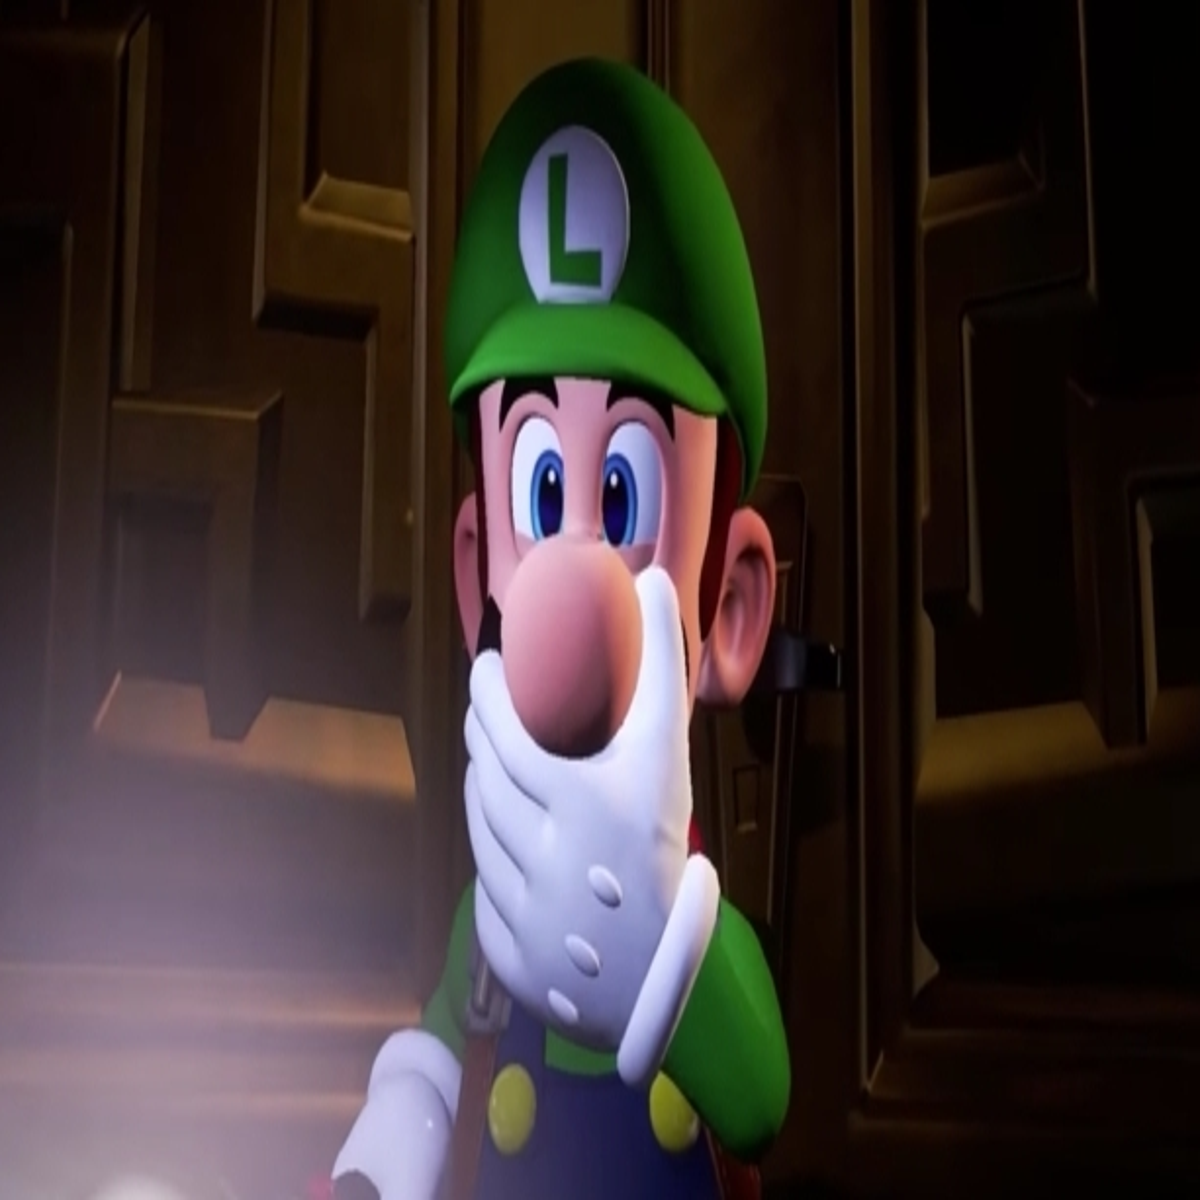 Hands On With The Spooktacular Luigi's Mansion Arcade - Feature